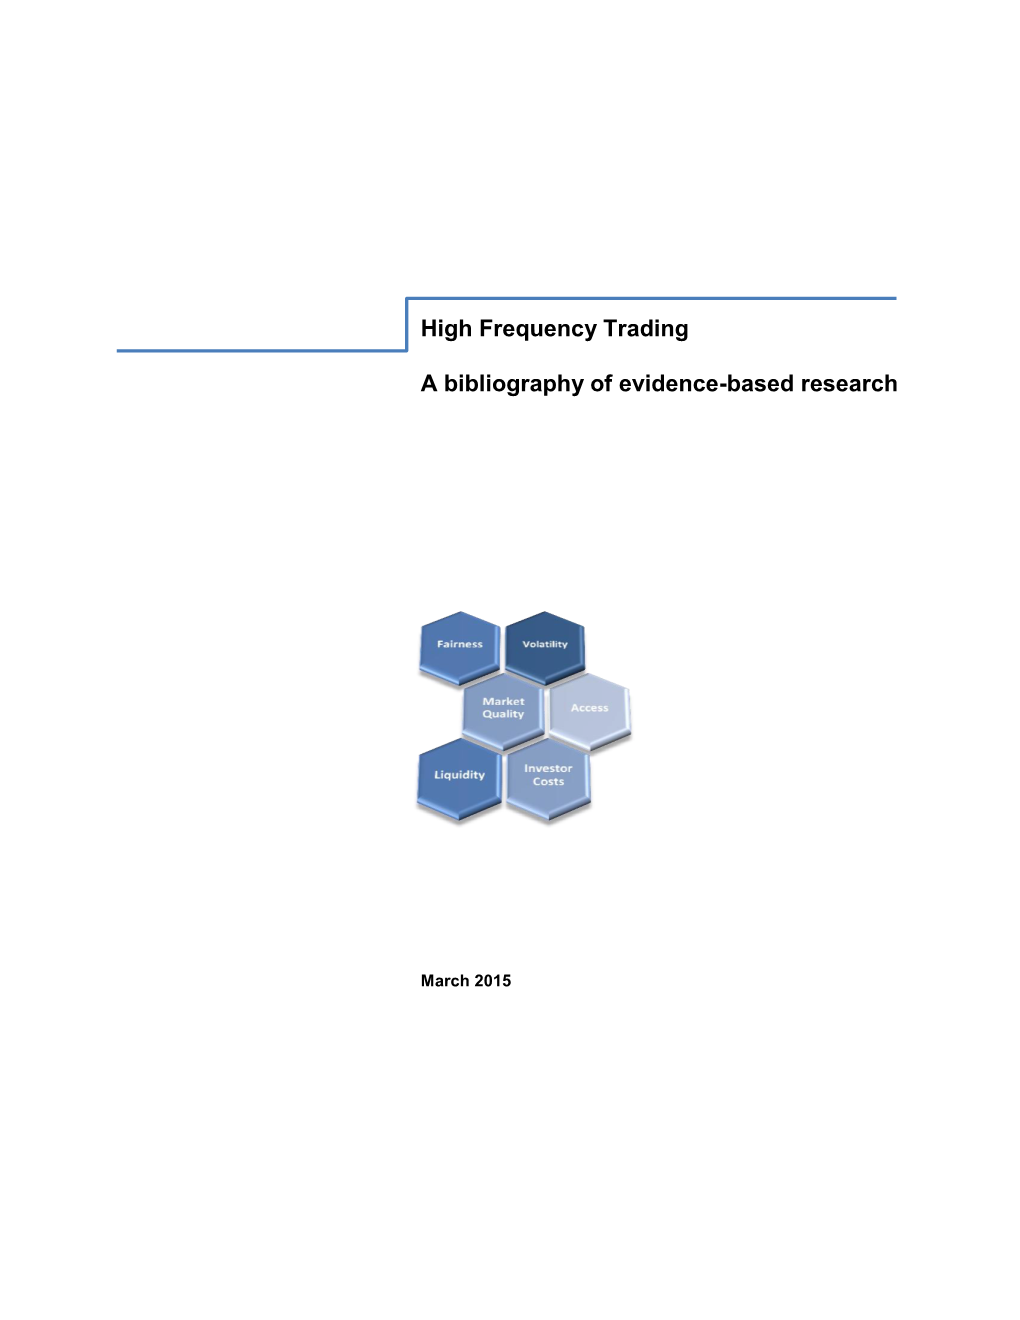 High Frequency Trading – a Bibliography of Evidence-Based Research